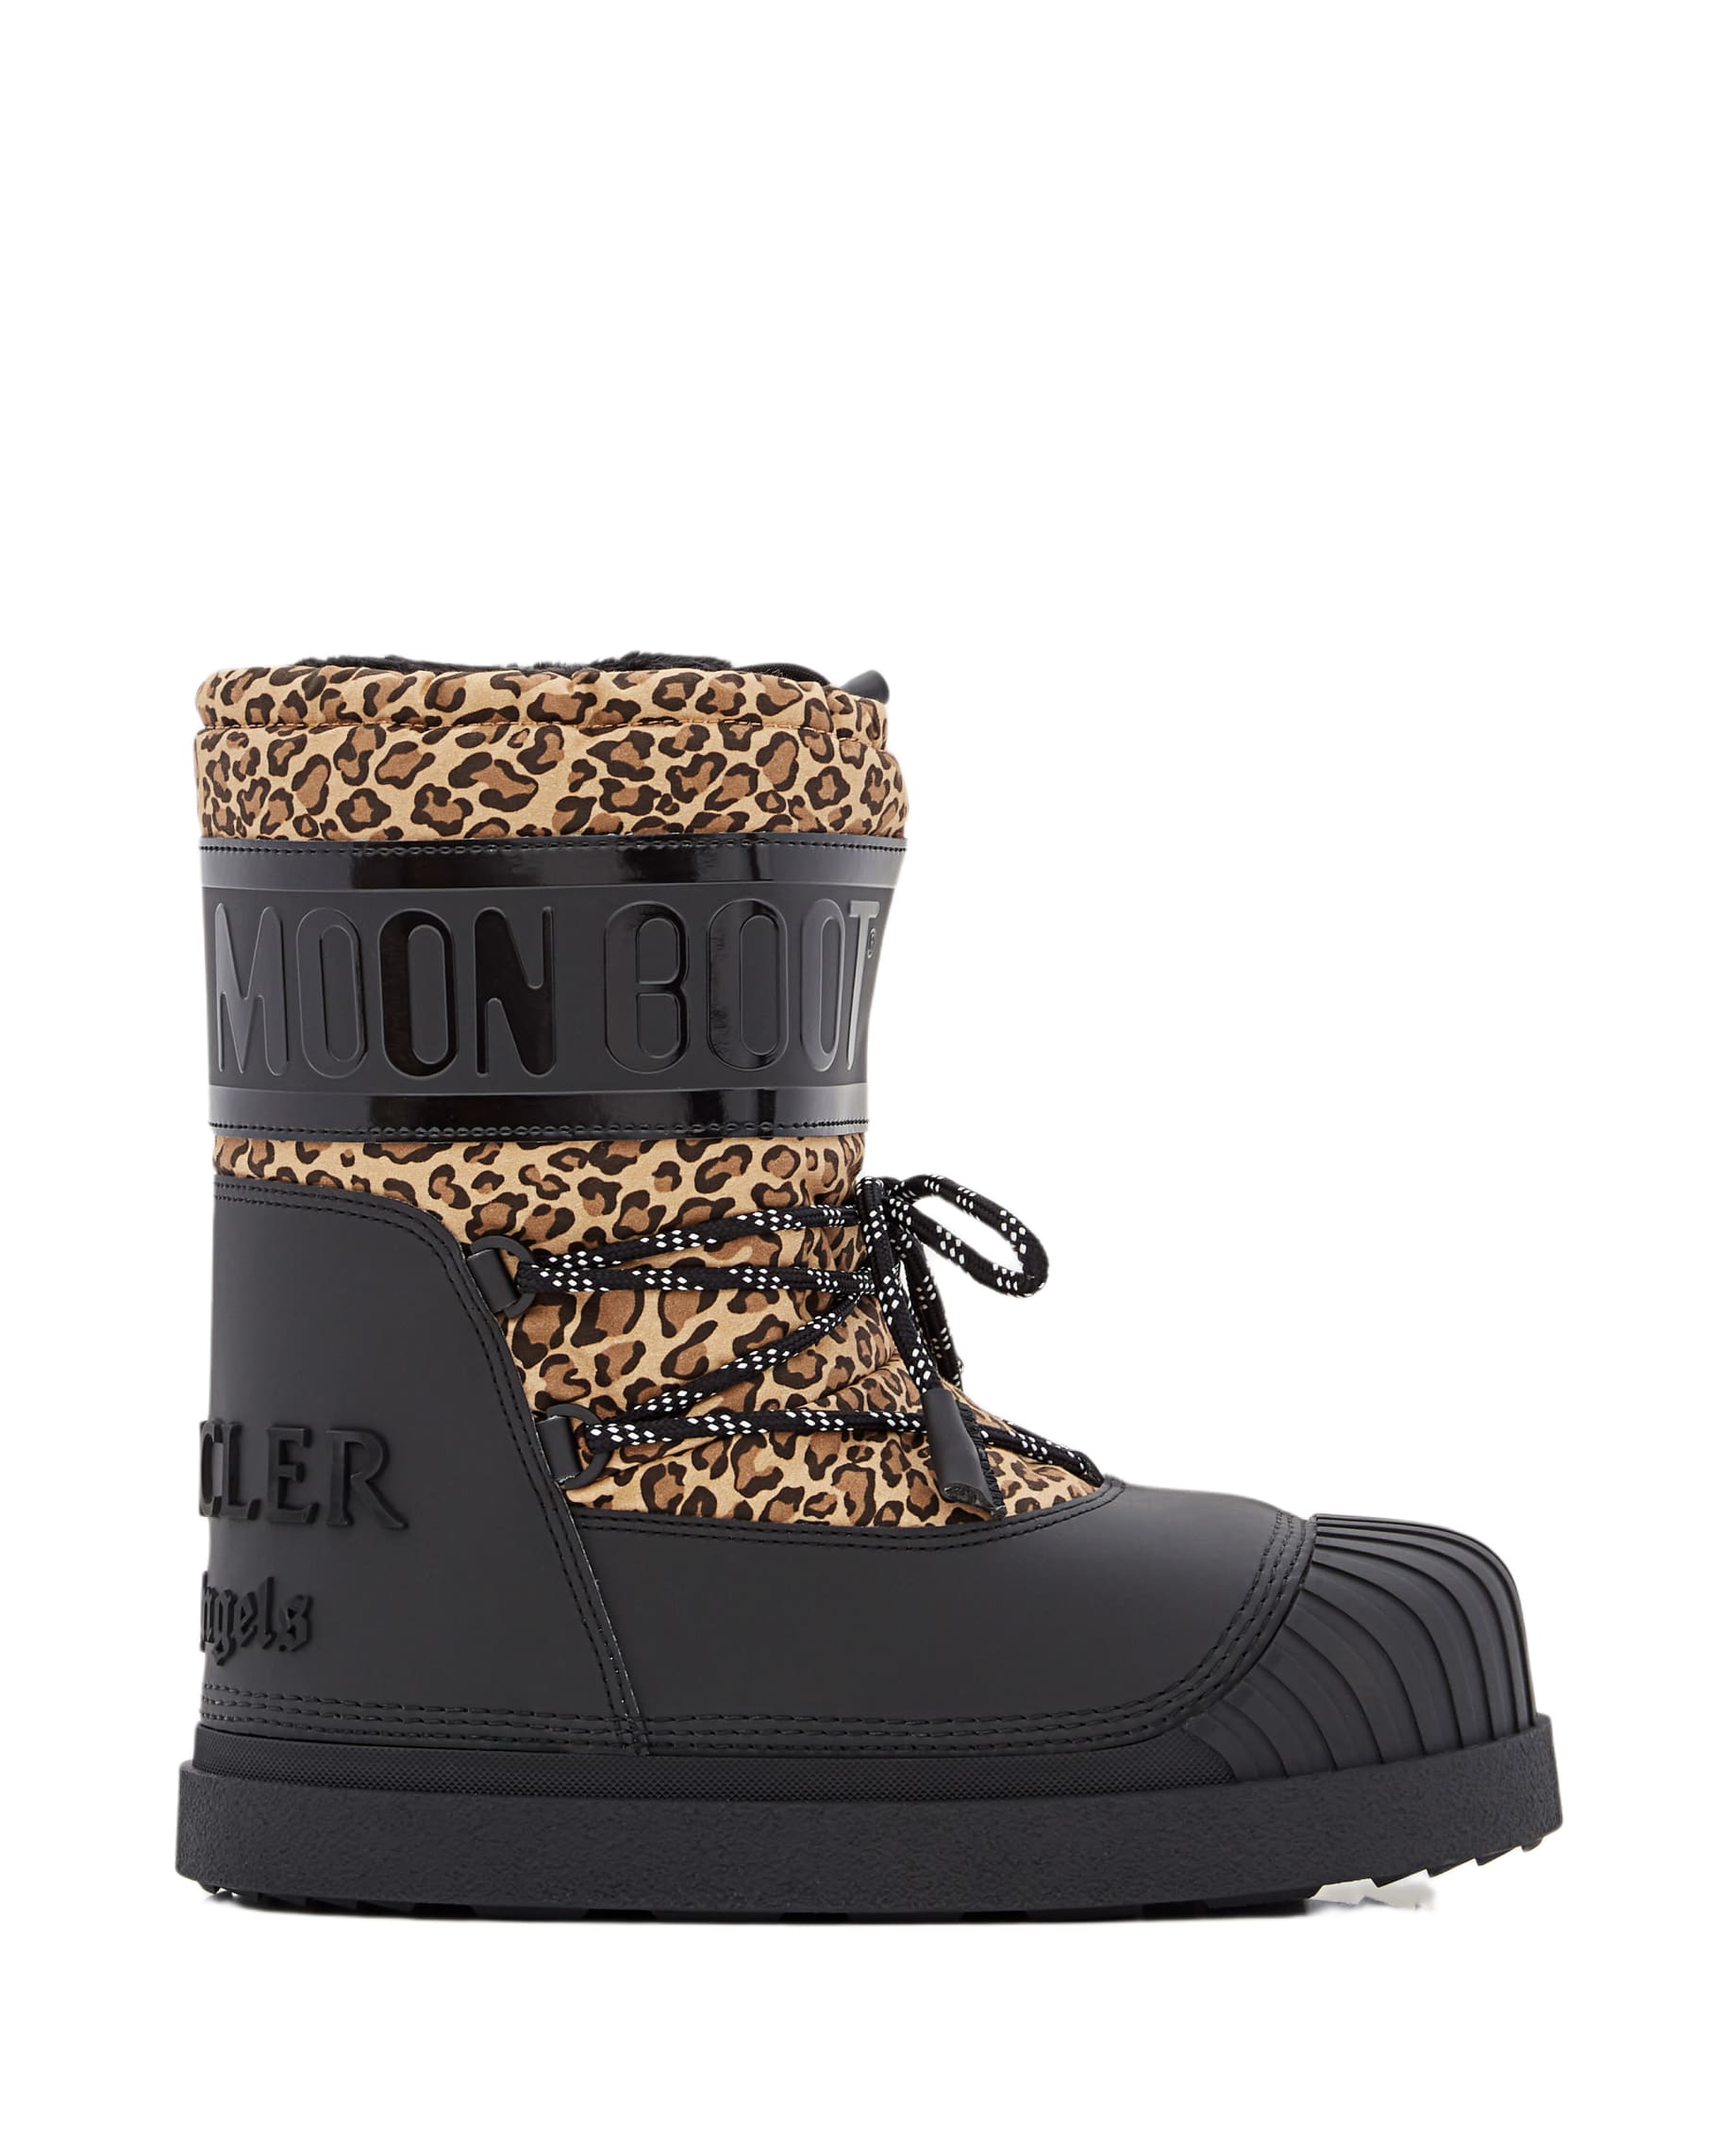 8 Moncler Palm Angels X Moon Boot Shedir Snow Boots in